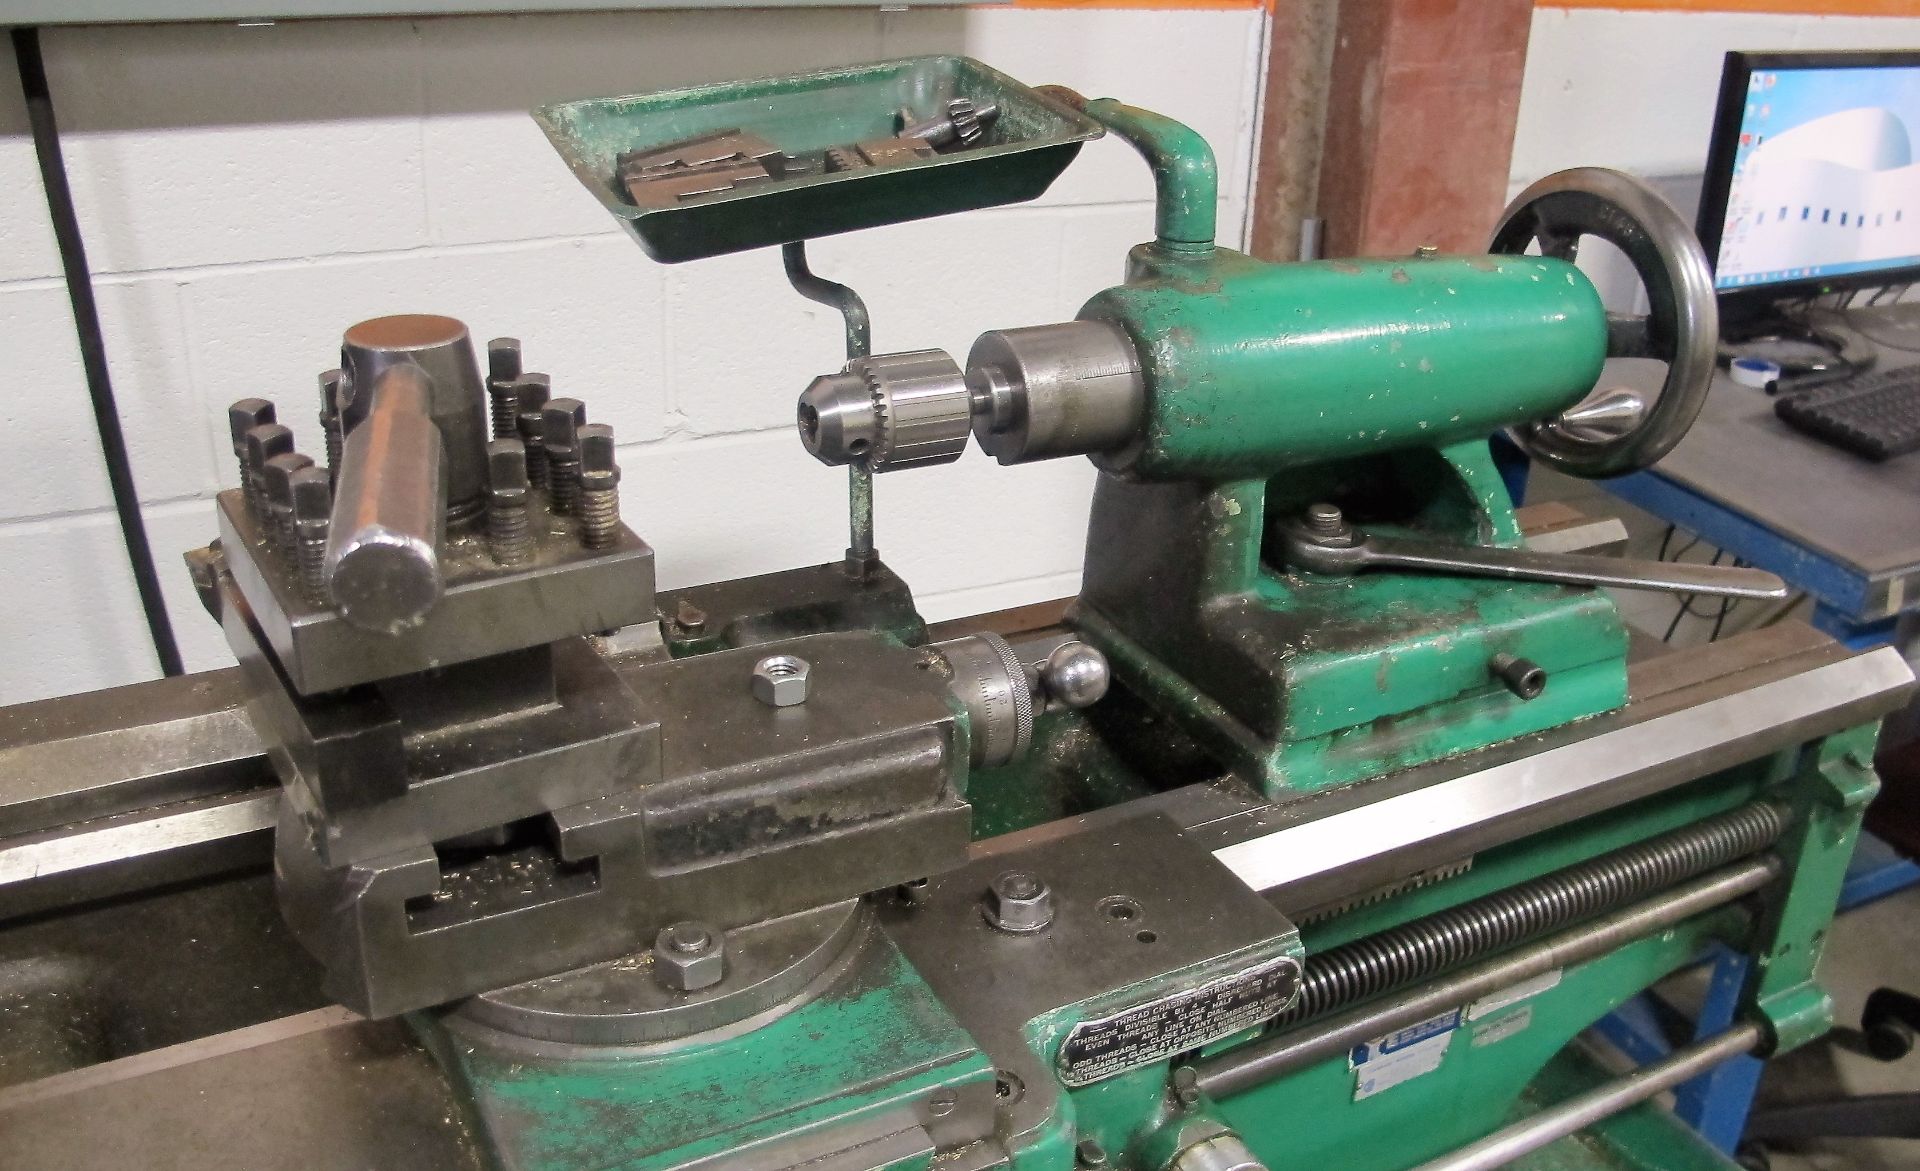 STANDARD-MODERN STD 14 ENGINE LATHE, 3HP, 7" 3 JAW CHUCK, 14" SWING, 42" BED, TAILSTOCK, TOOL - Image 3 of 4